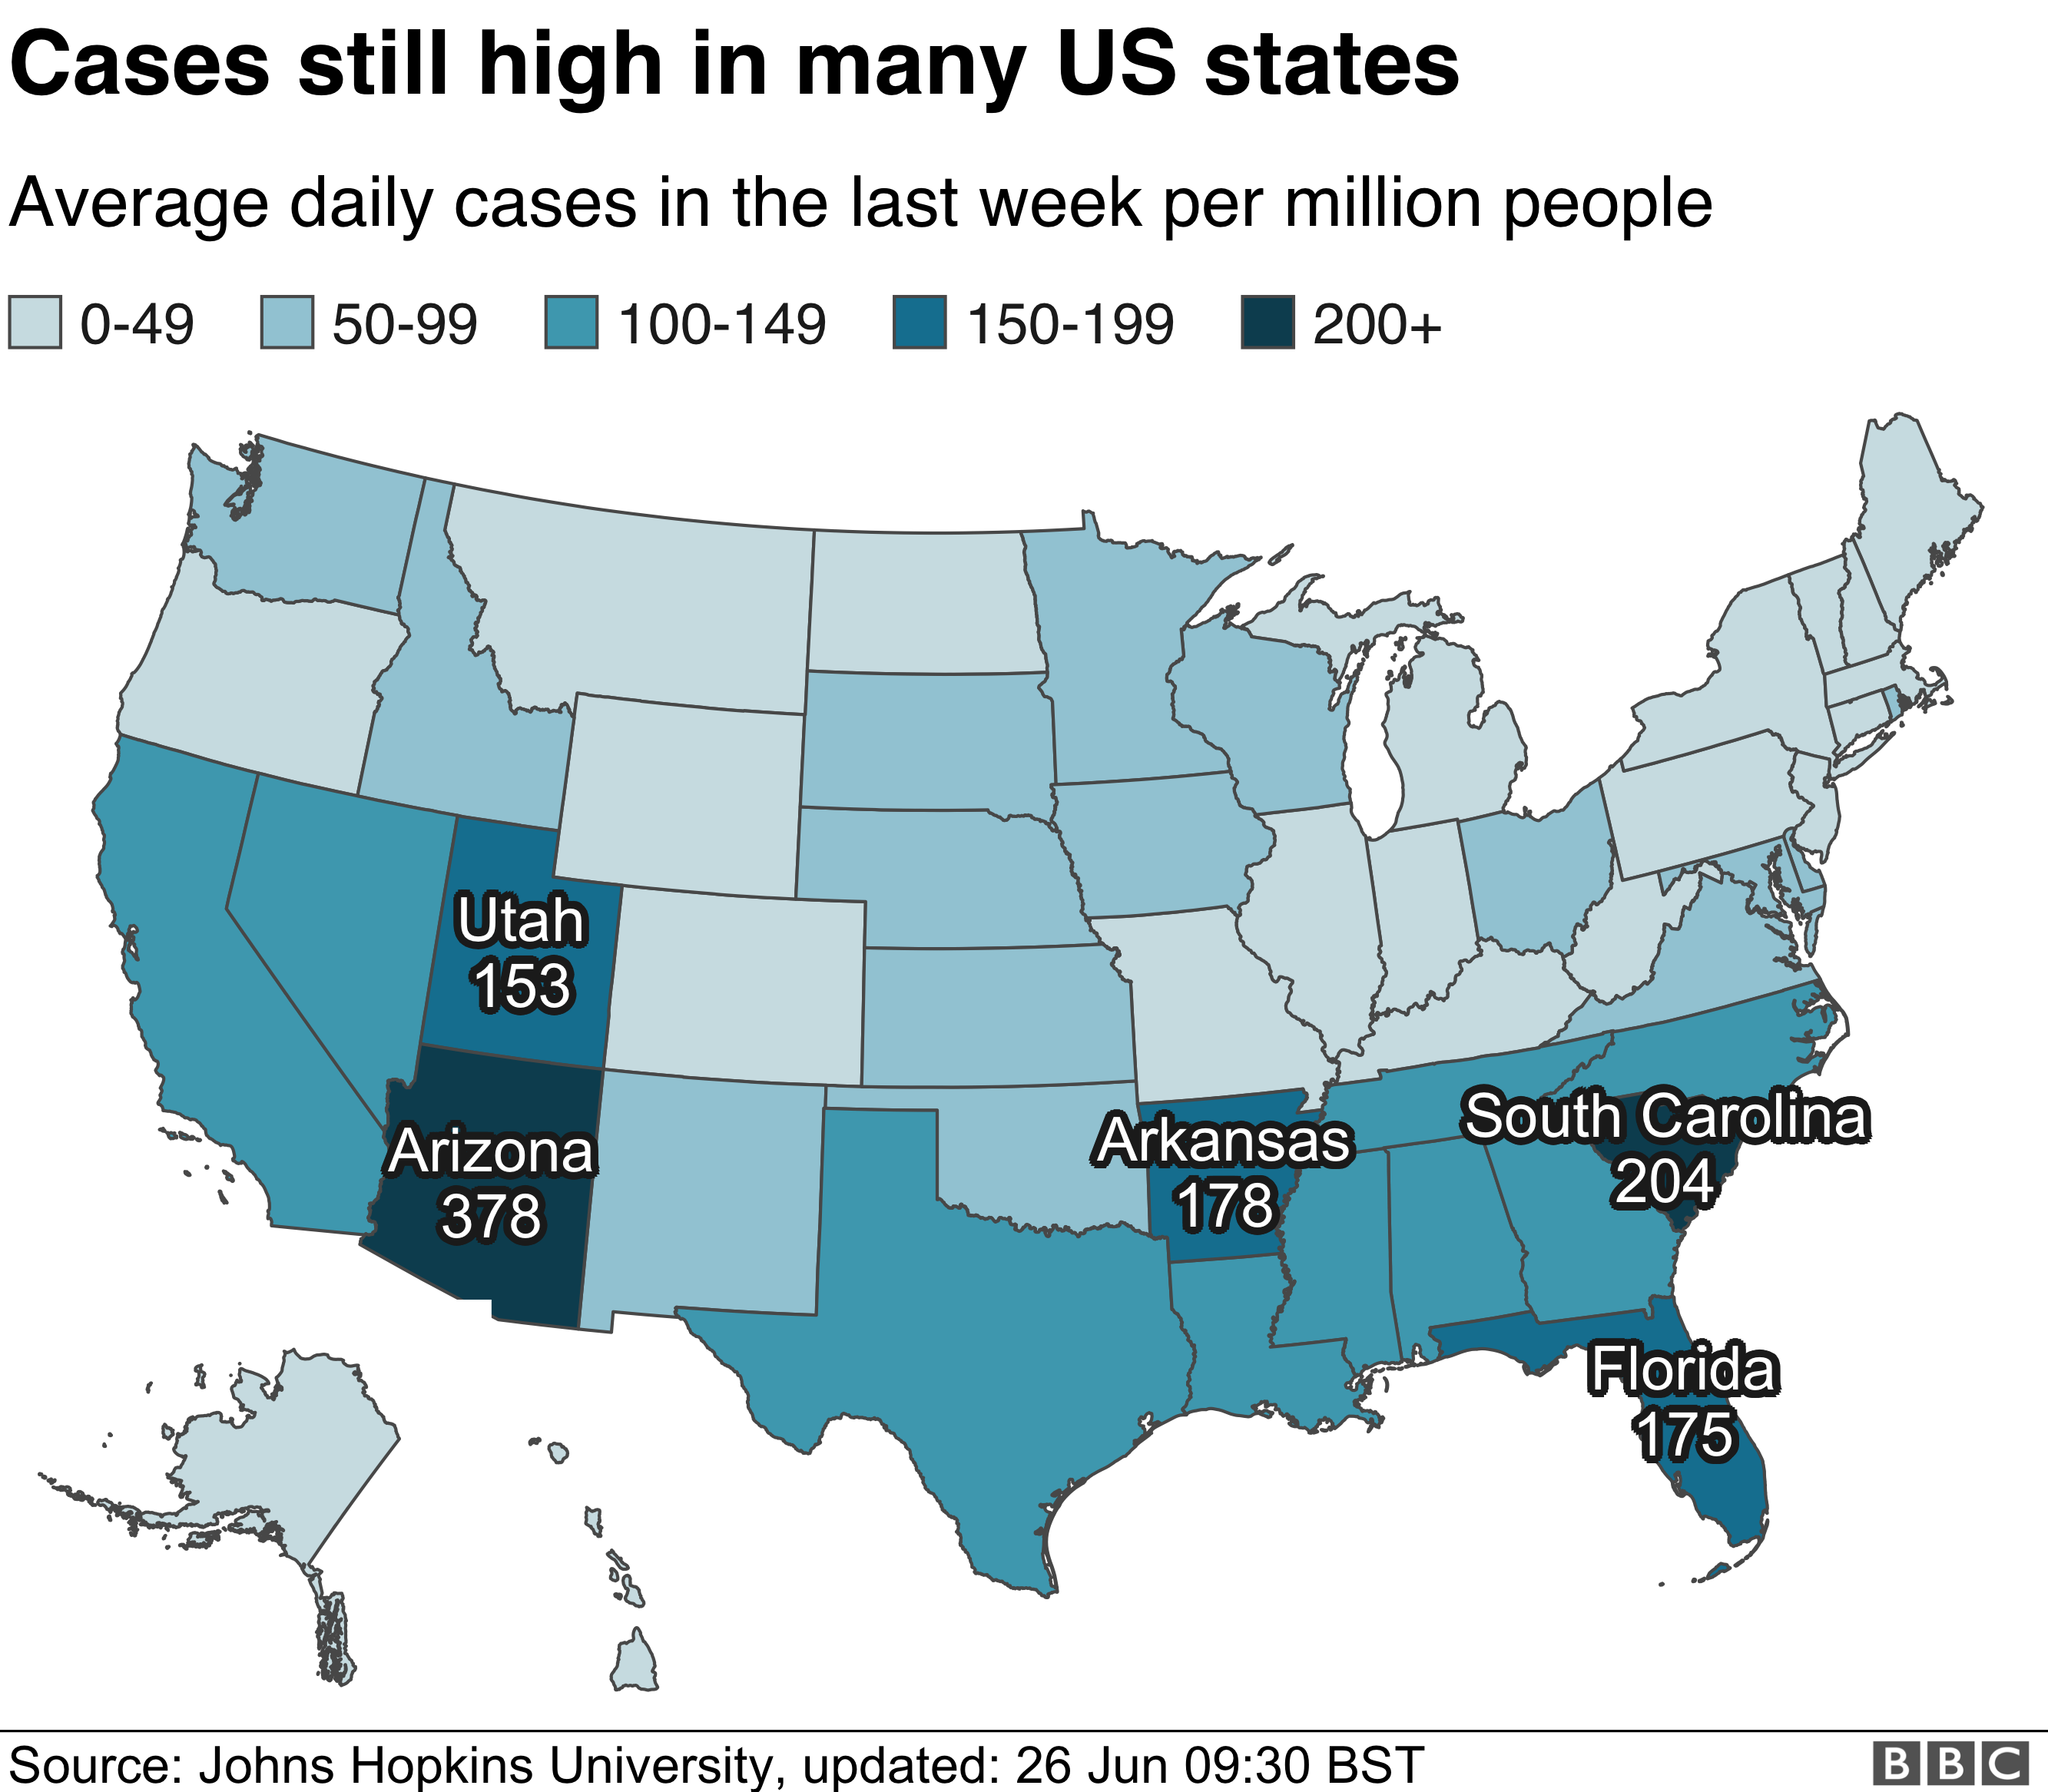 Map showing average daily cases per million people in US states in the last week